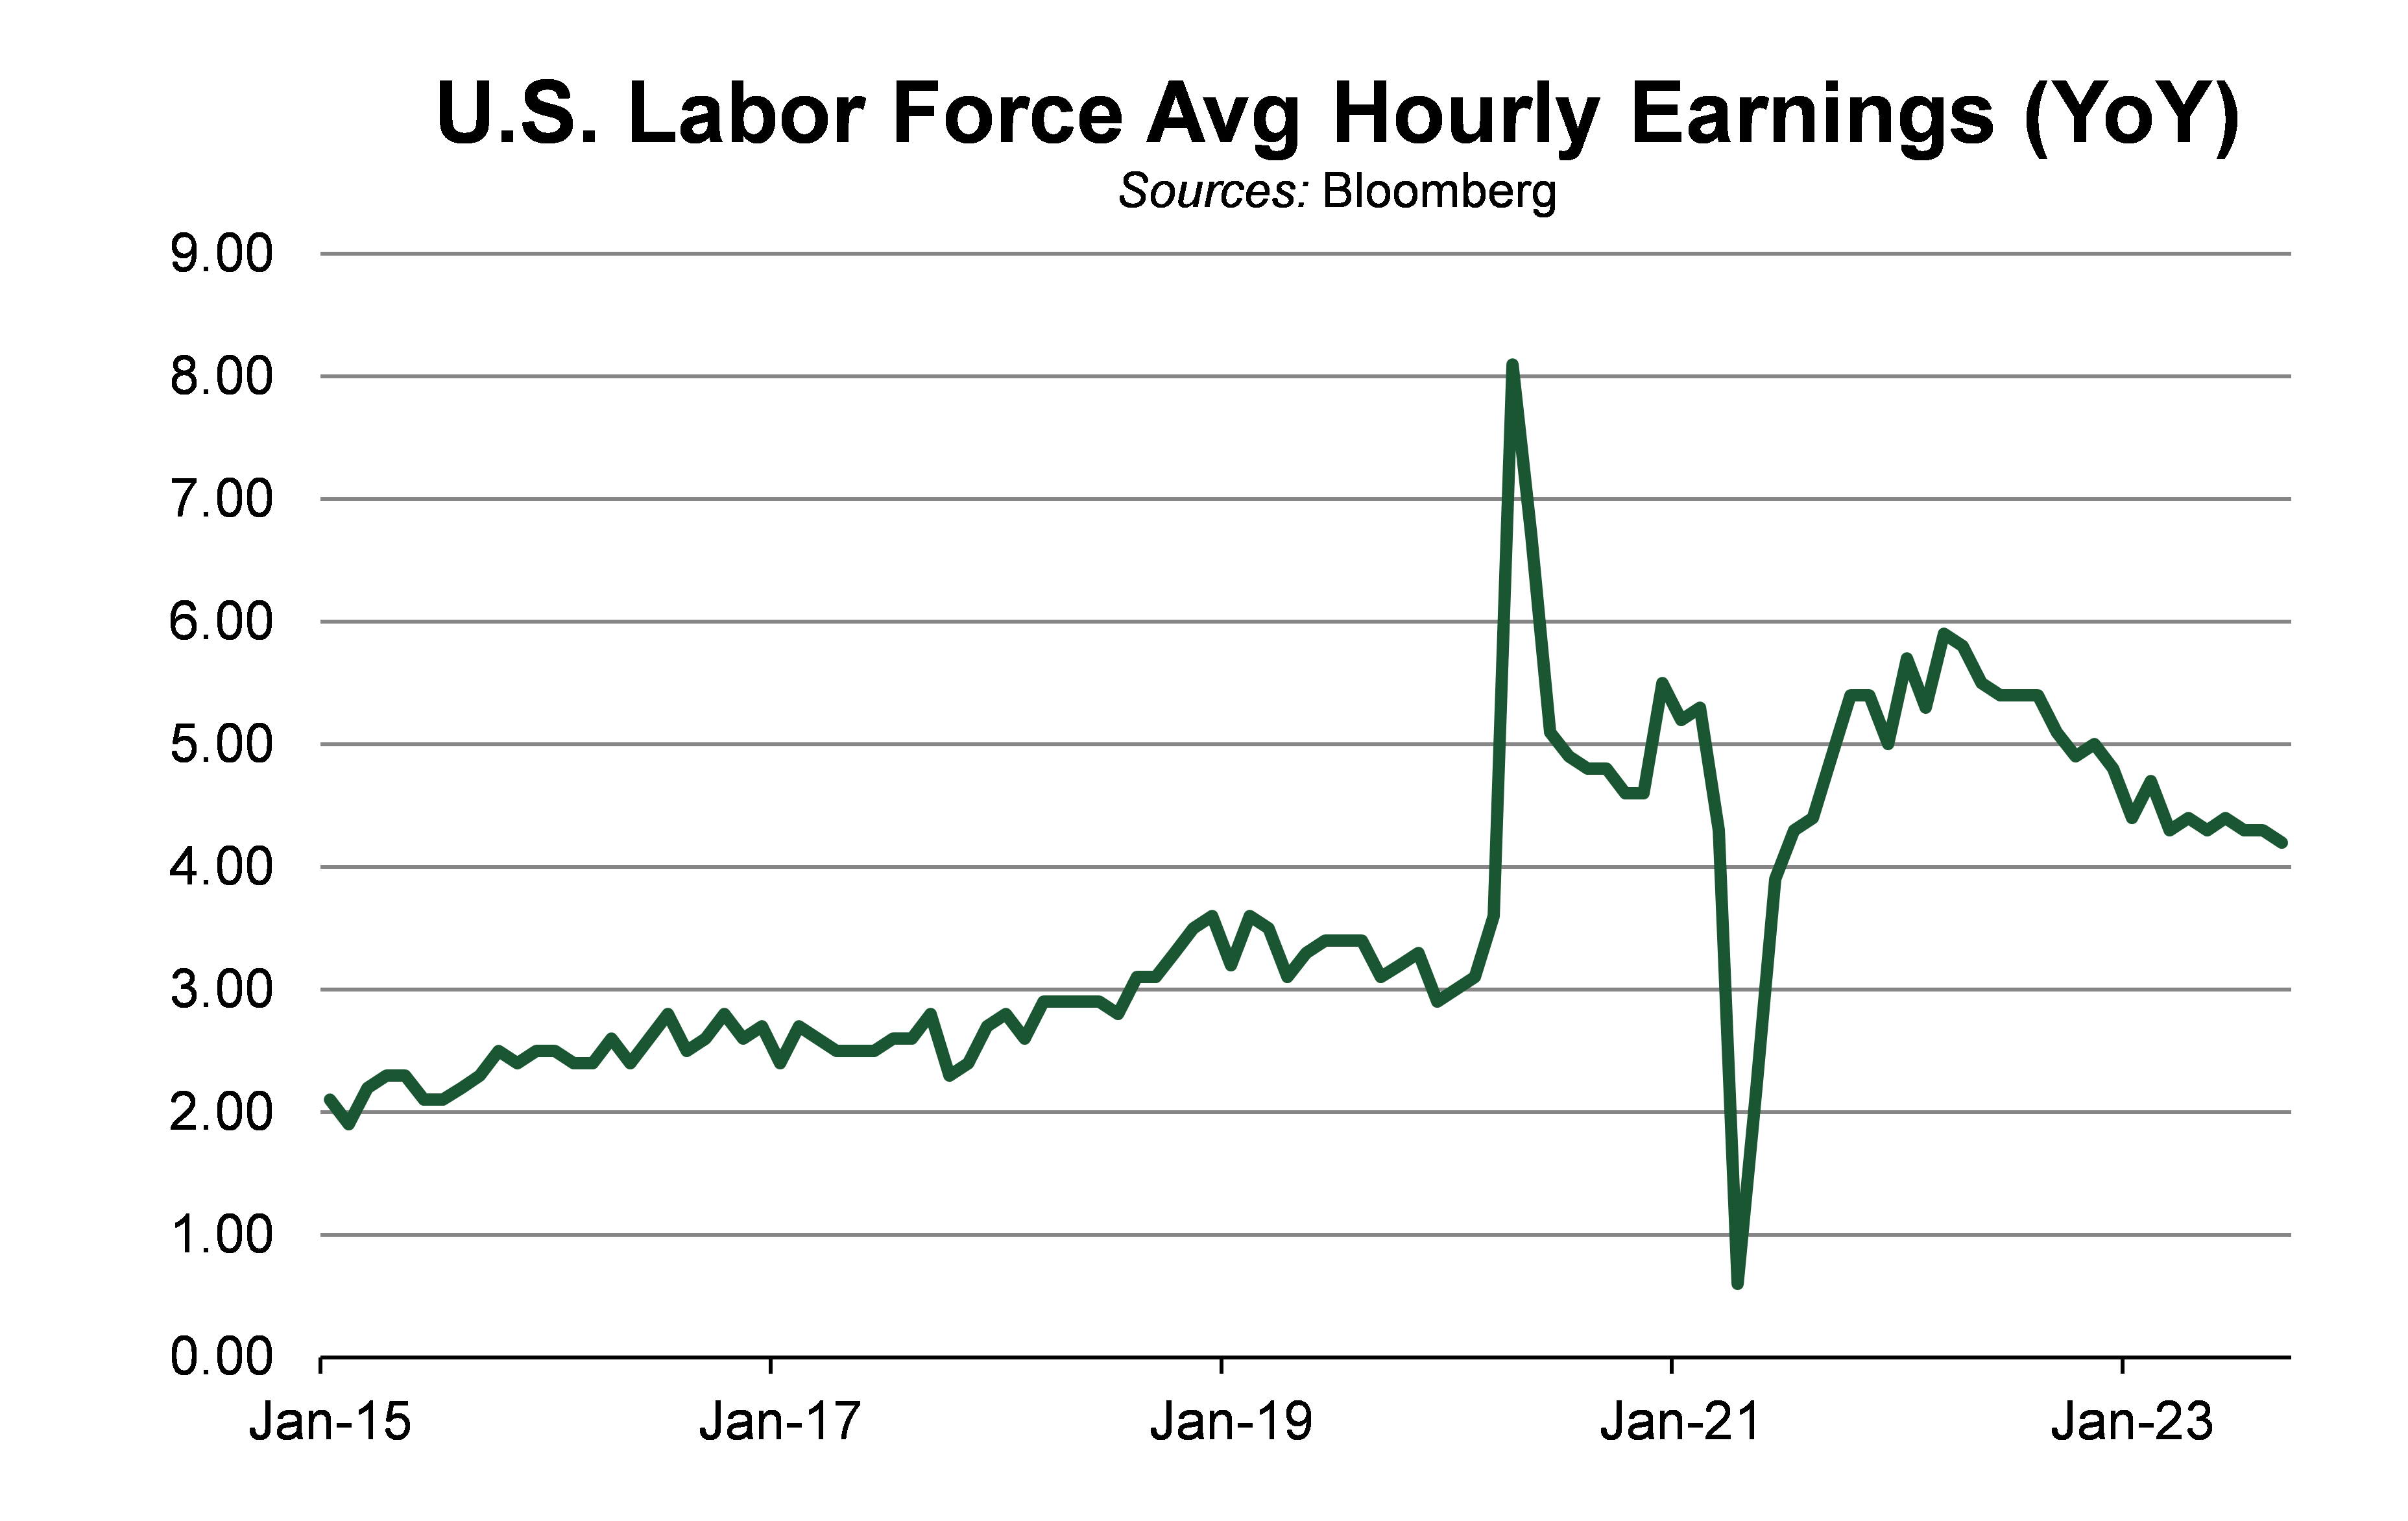 line graph showing the US labor force average hourly earnings year over year